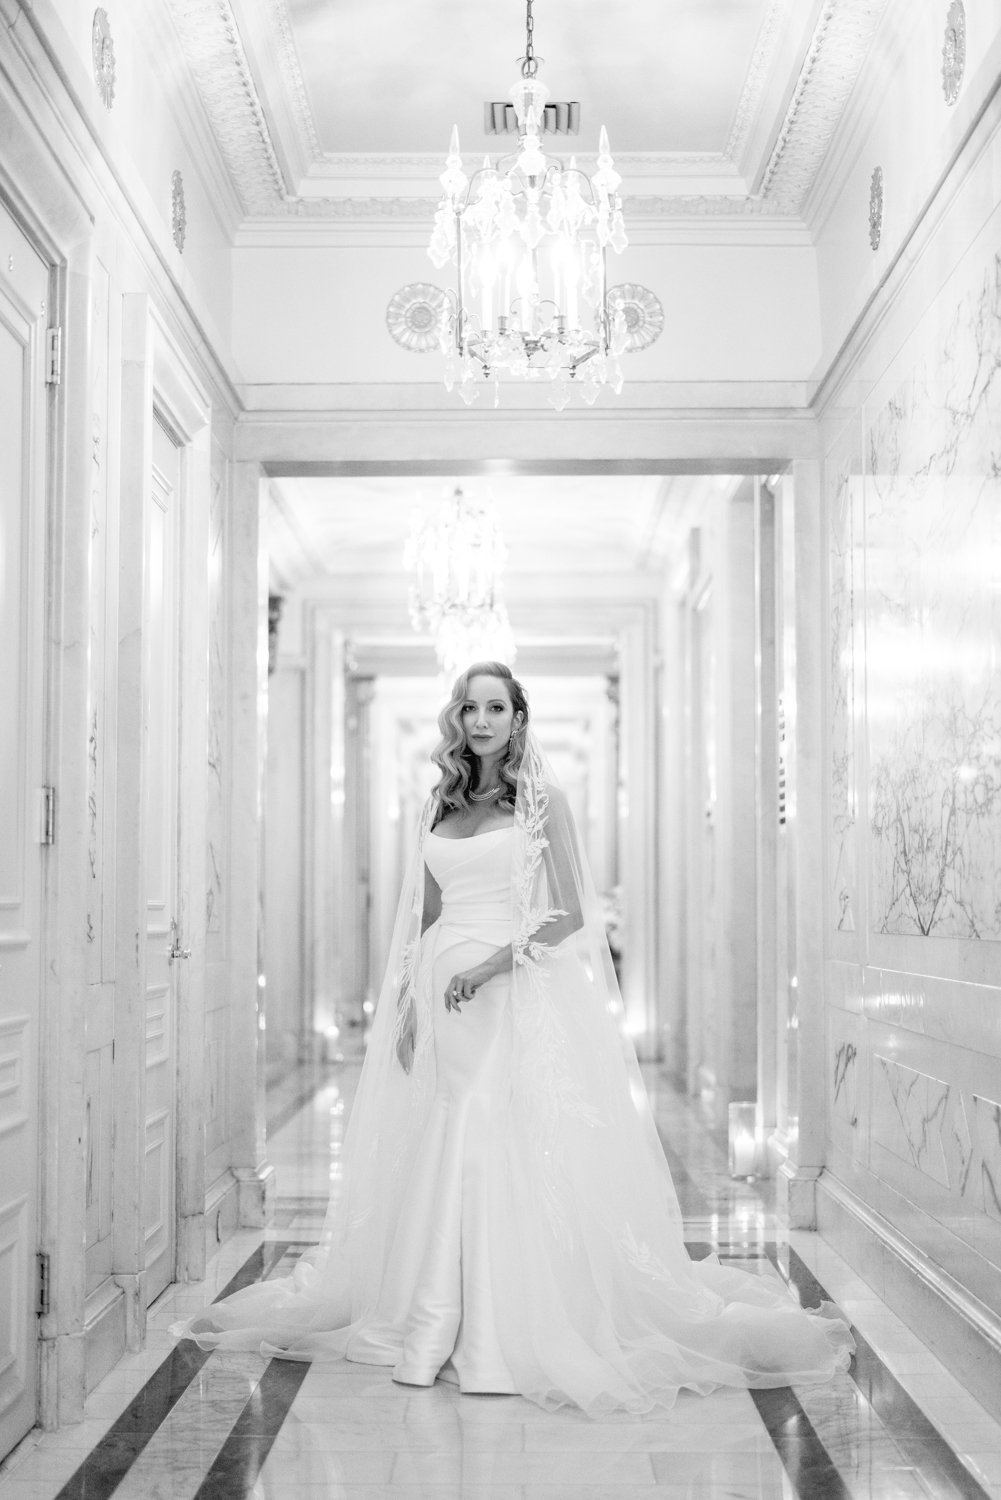 Bride stands in an extravagant hallway at the St Regis Hotel in New York City. She is wearing a wedding dress with a lace-detailed veil.

Manhattan Luxury Wedding. New York Luxury Wedding Photographer. Wedding in Manhattan. NYC Luxury Wedding. 